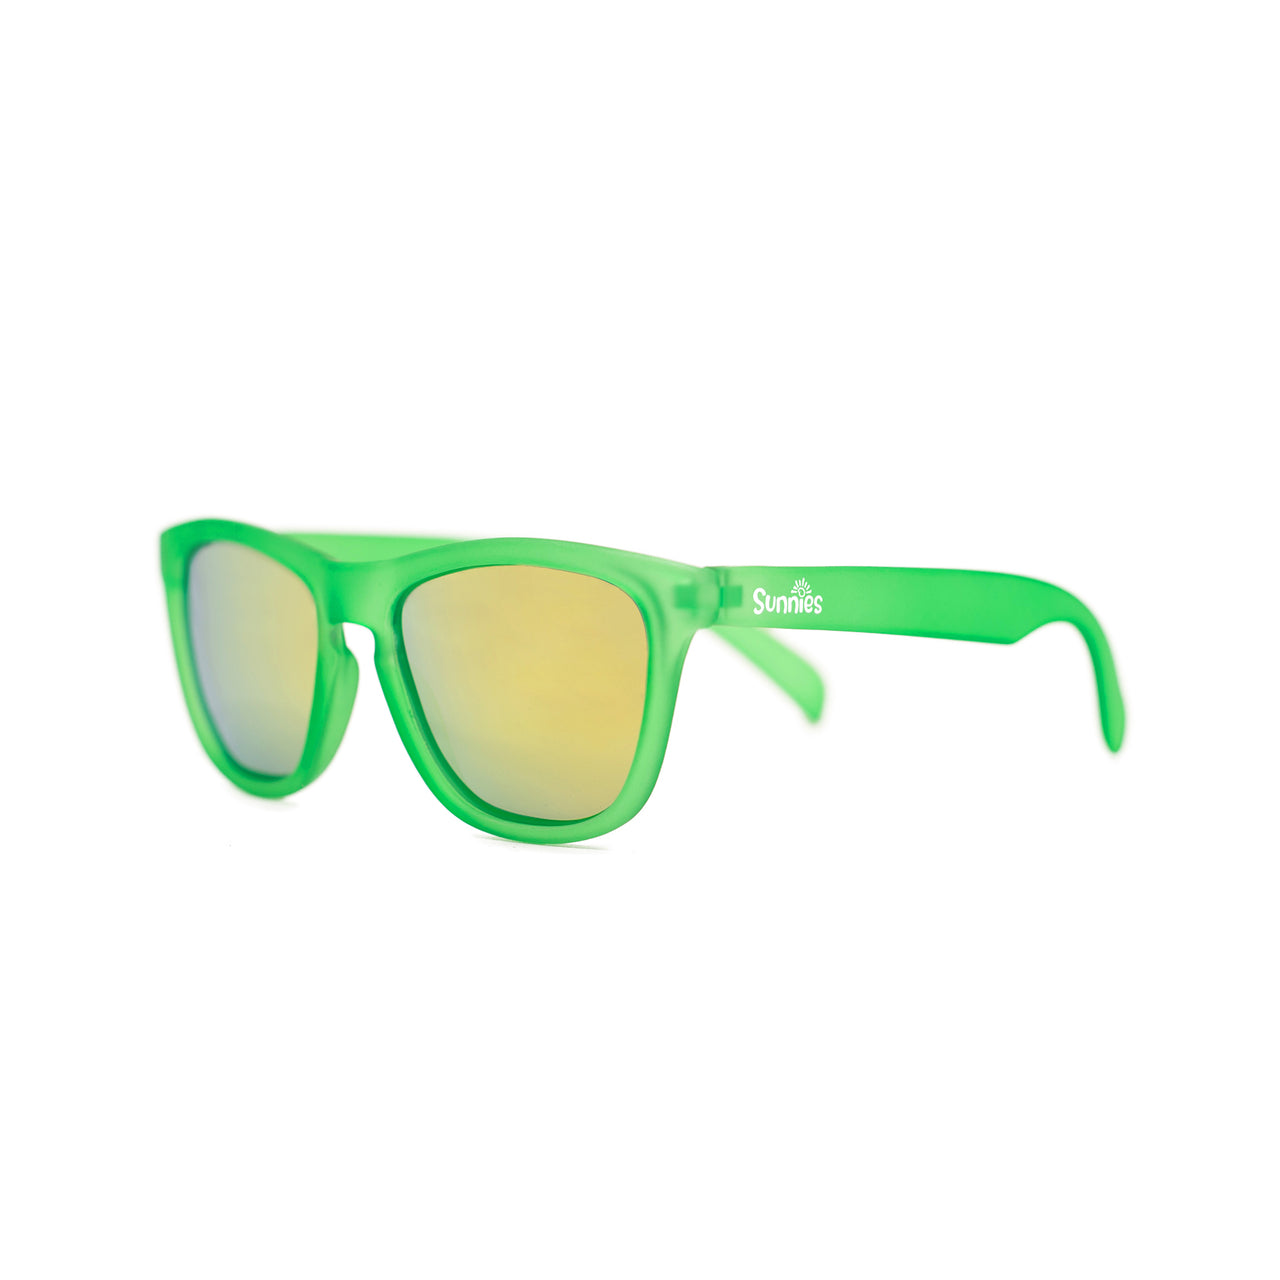 Sunnies polarized kids sunglasses in a transparent green frame and reflective gold lenses